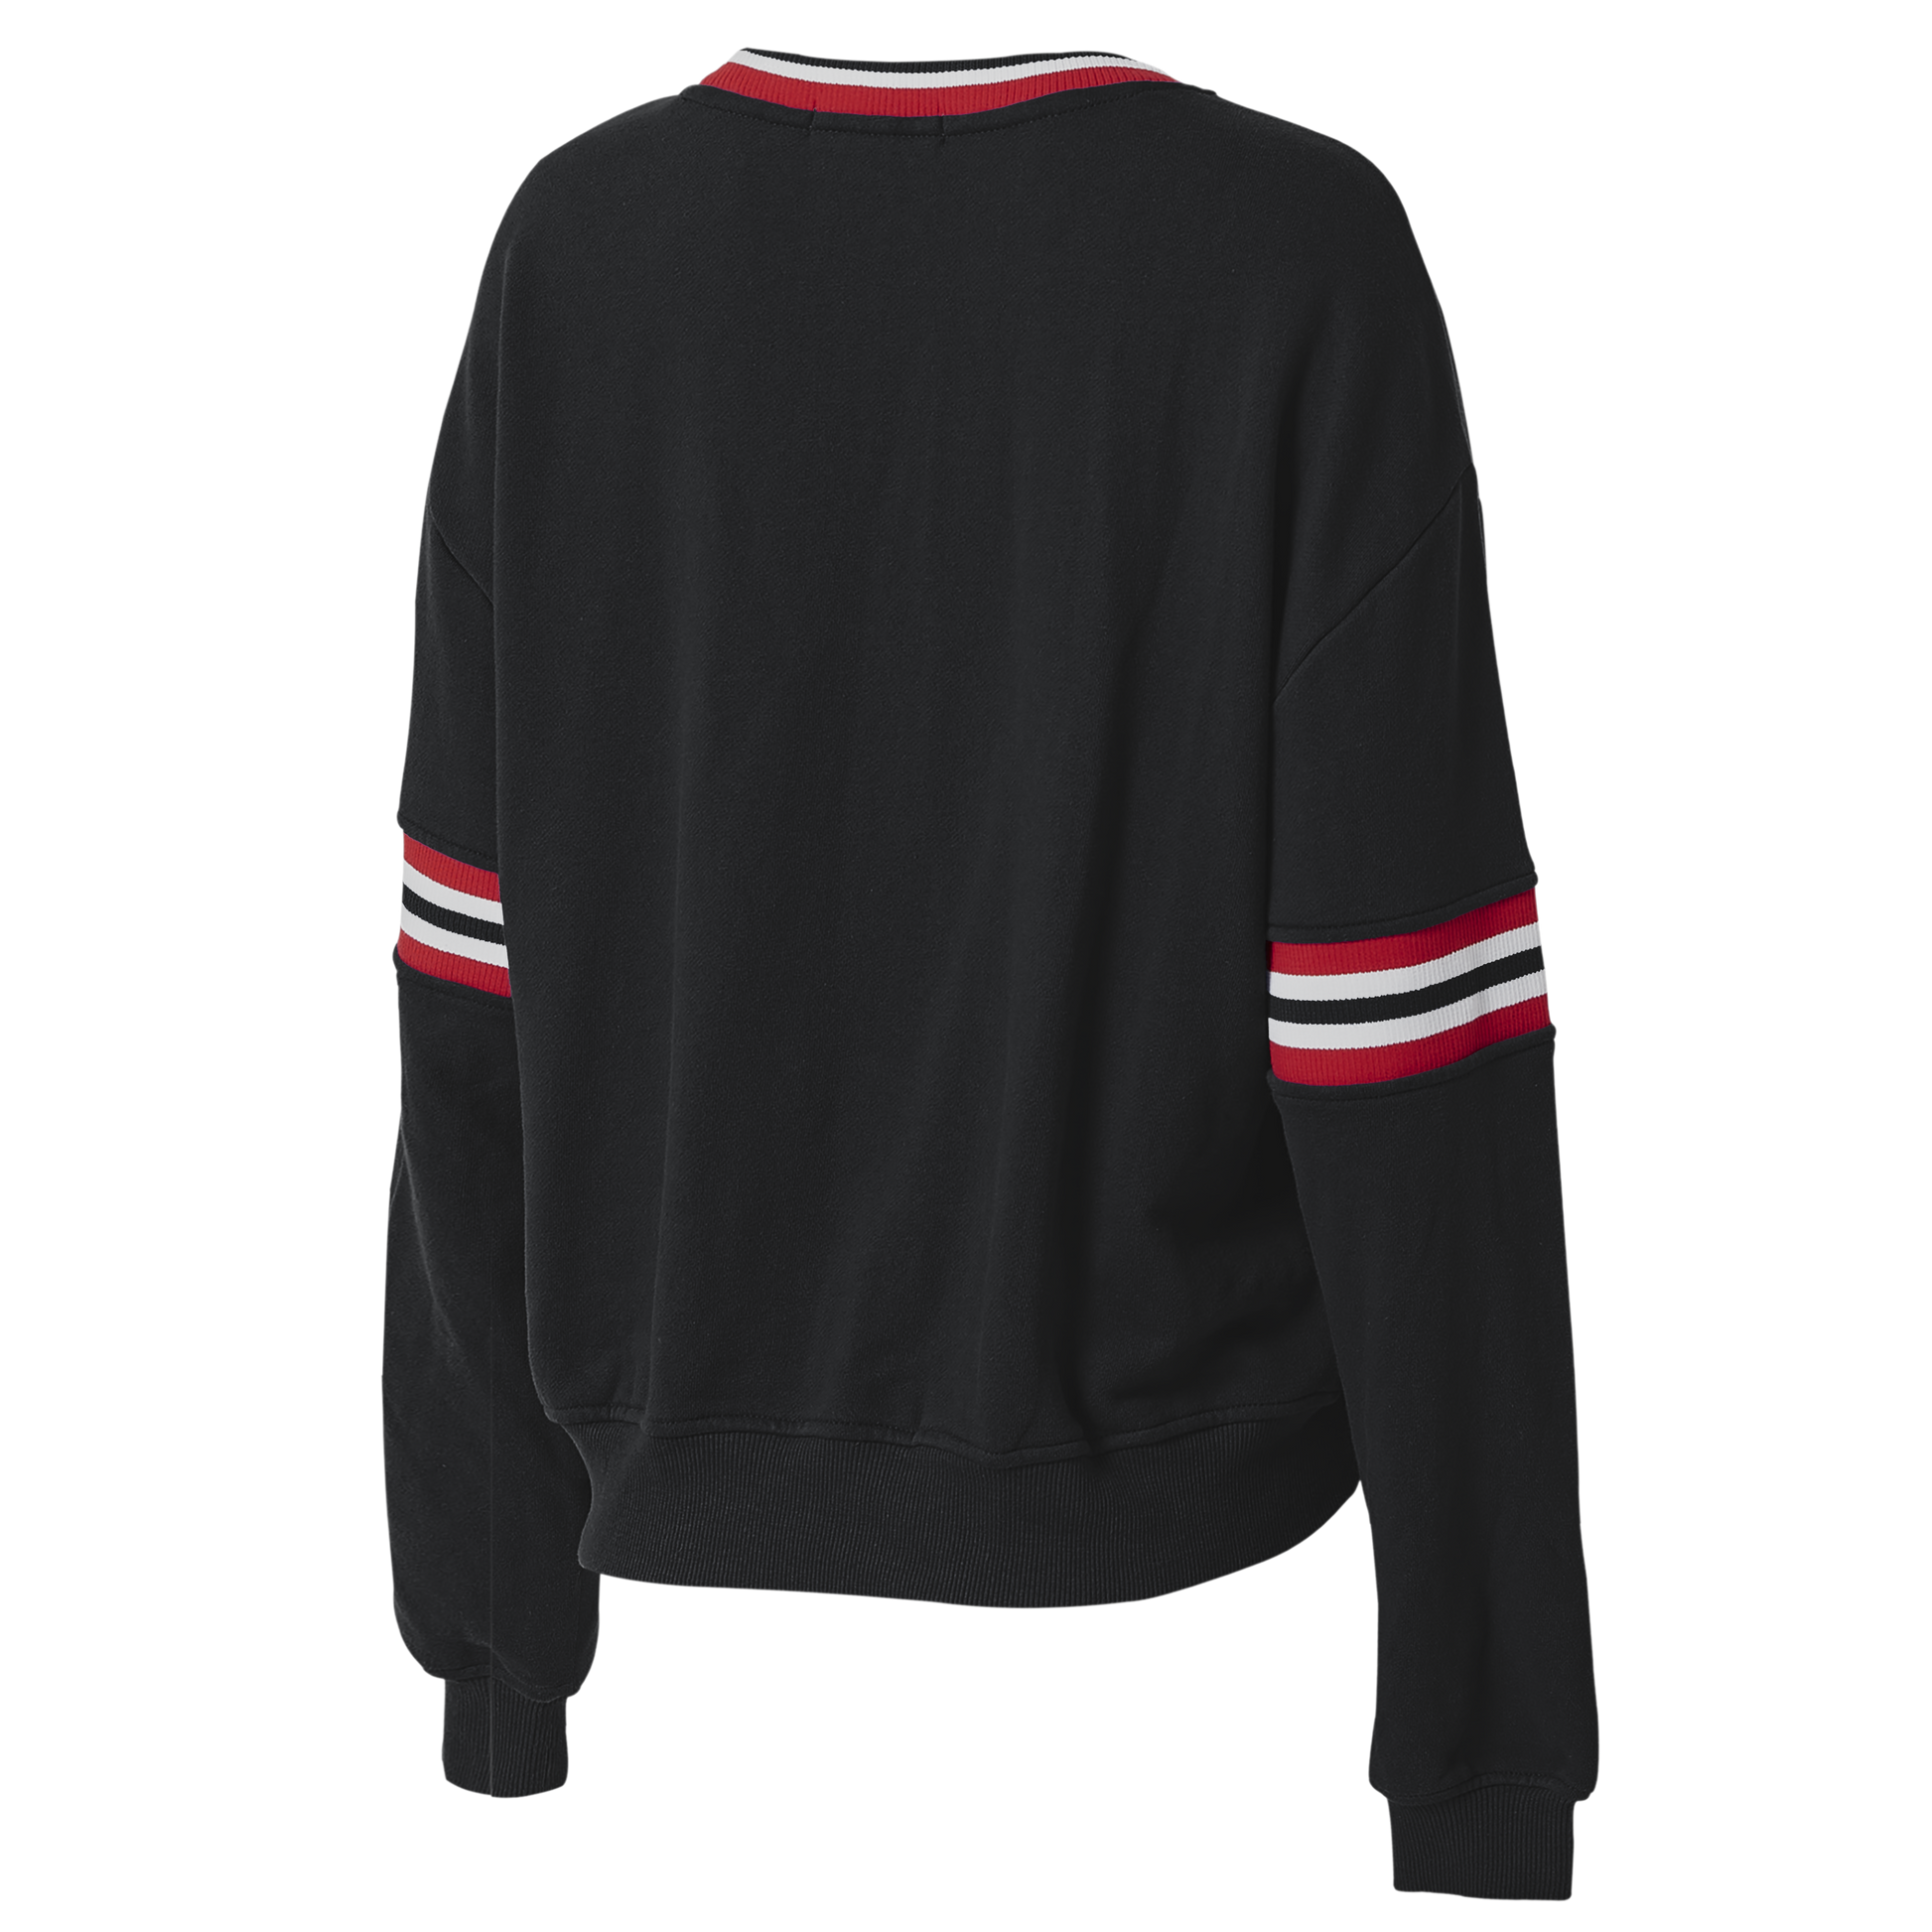 Back: Black crewneck with red white and black striping on sides and red & white collar